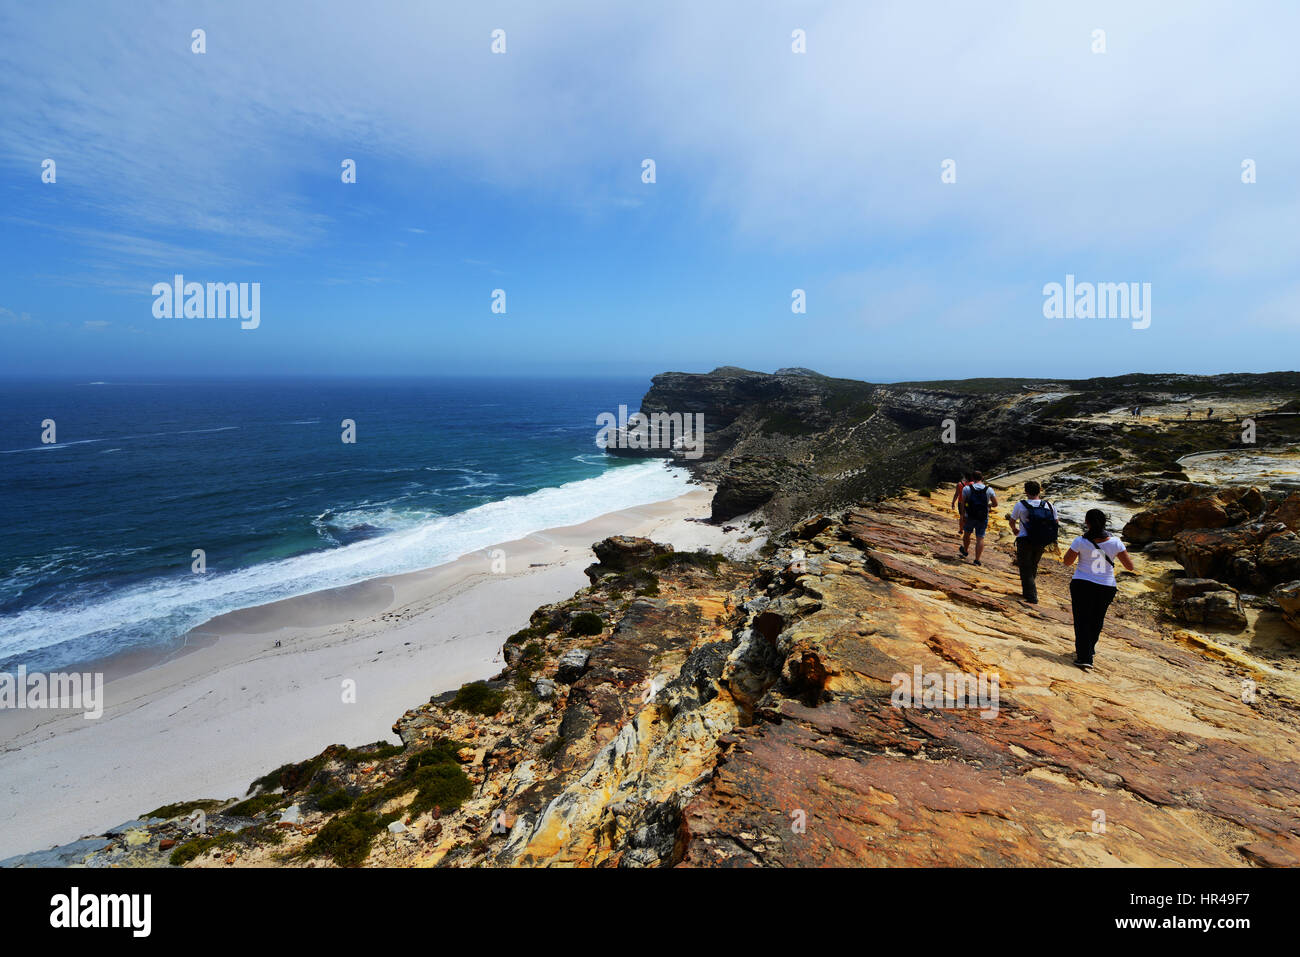 Hikers hiking above Dias beach in the Table Mountain national park, near the cape of good hope. Stock Photo